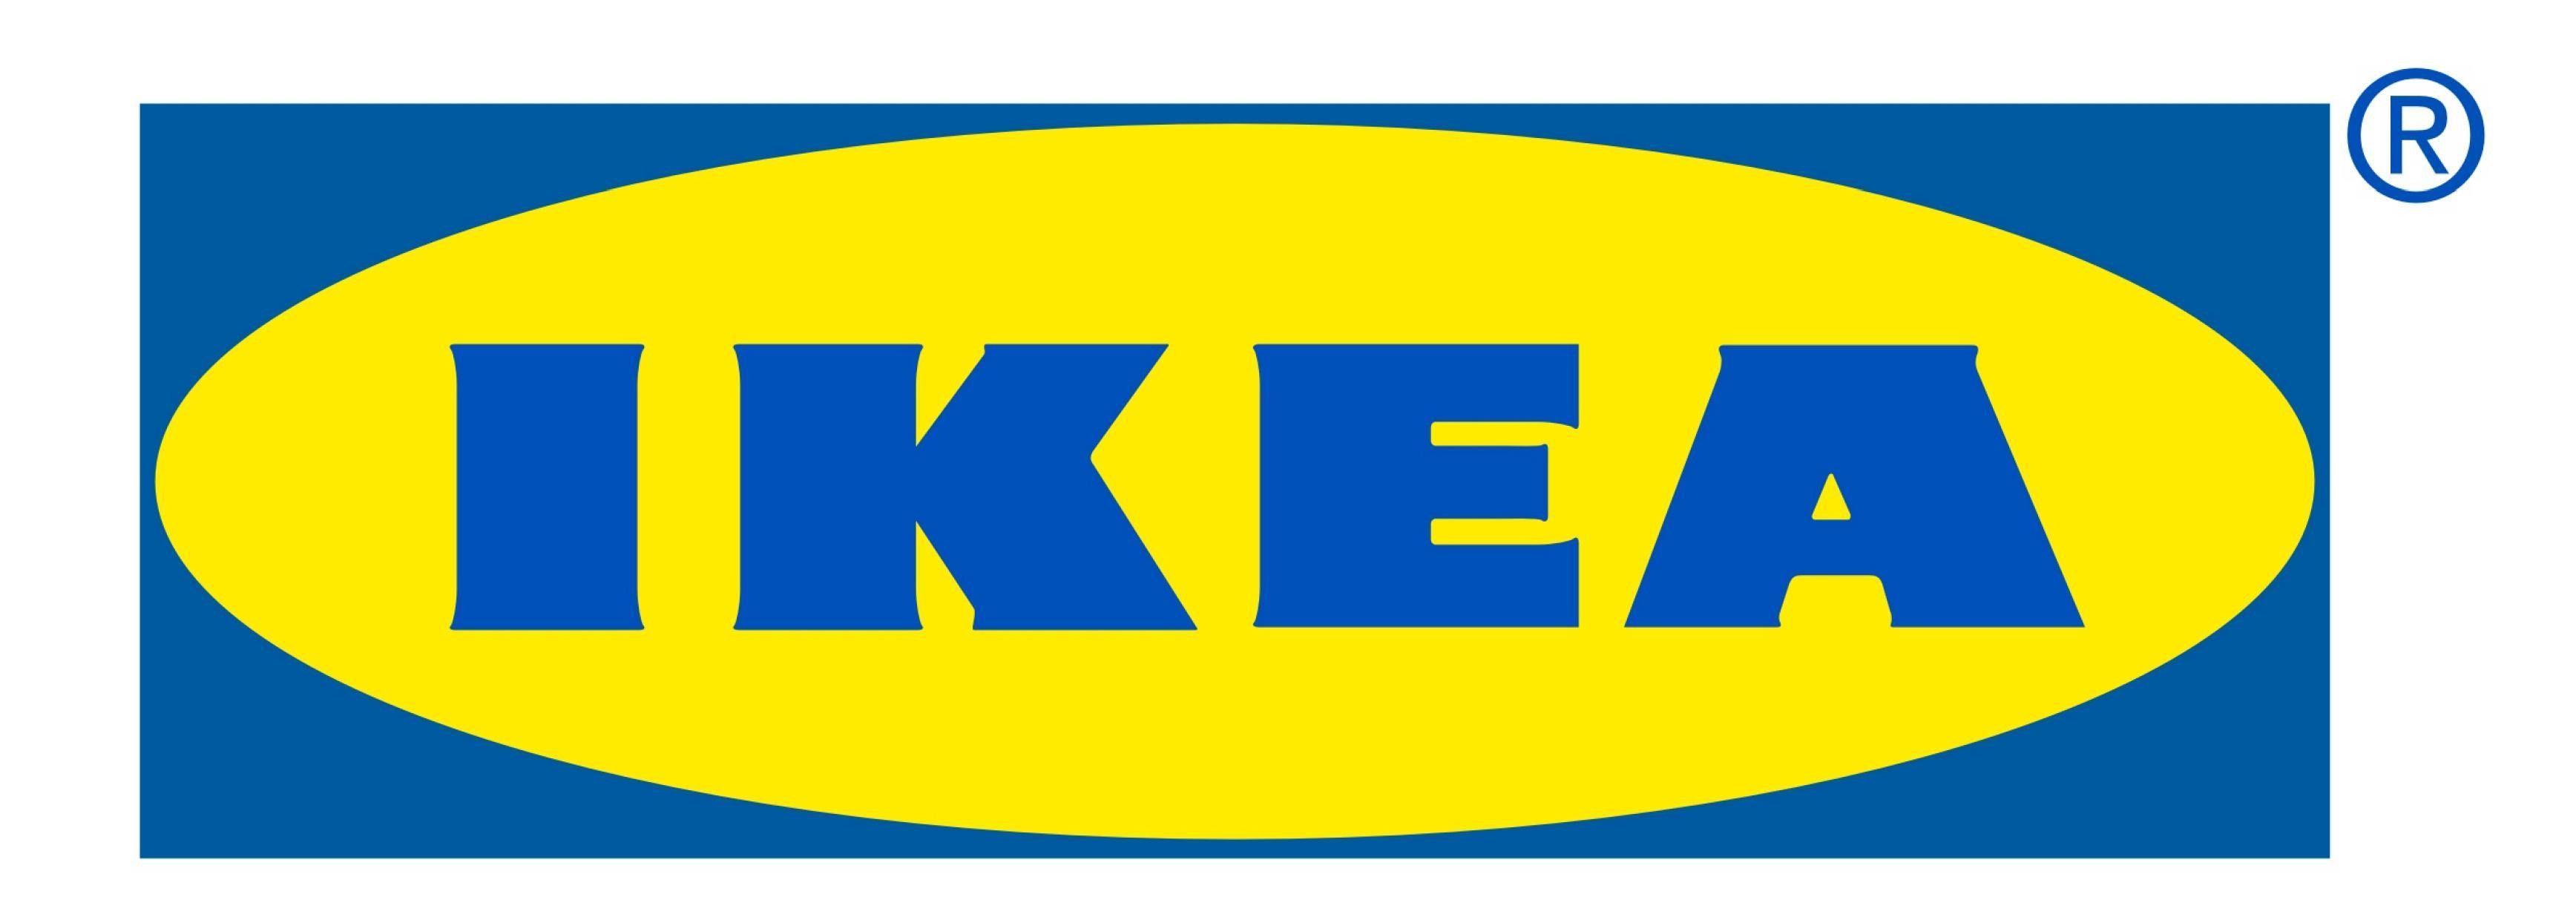 Blue and Yellow Company Logo - IKEA Logo (شعار شركة ايكيا) PNG Transparent Background Download ...